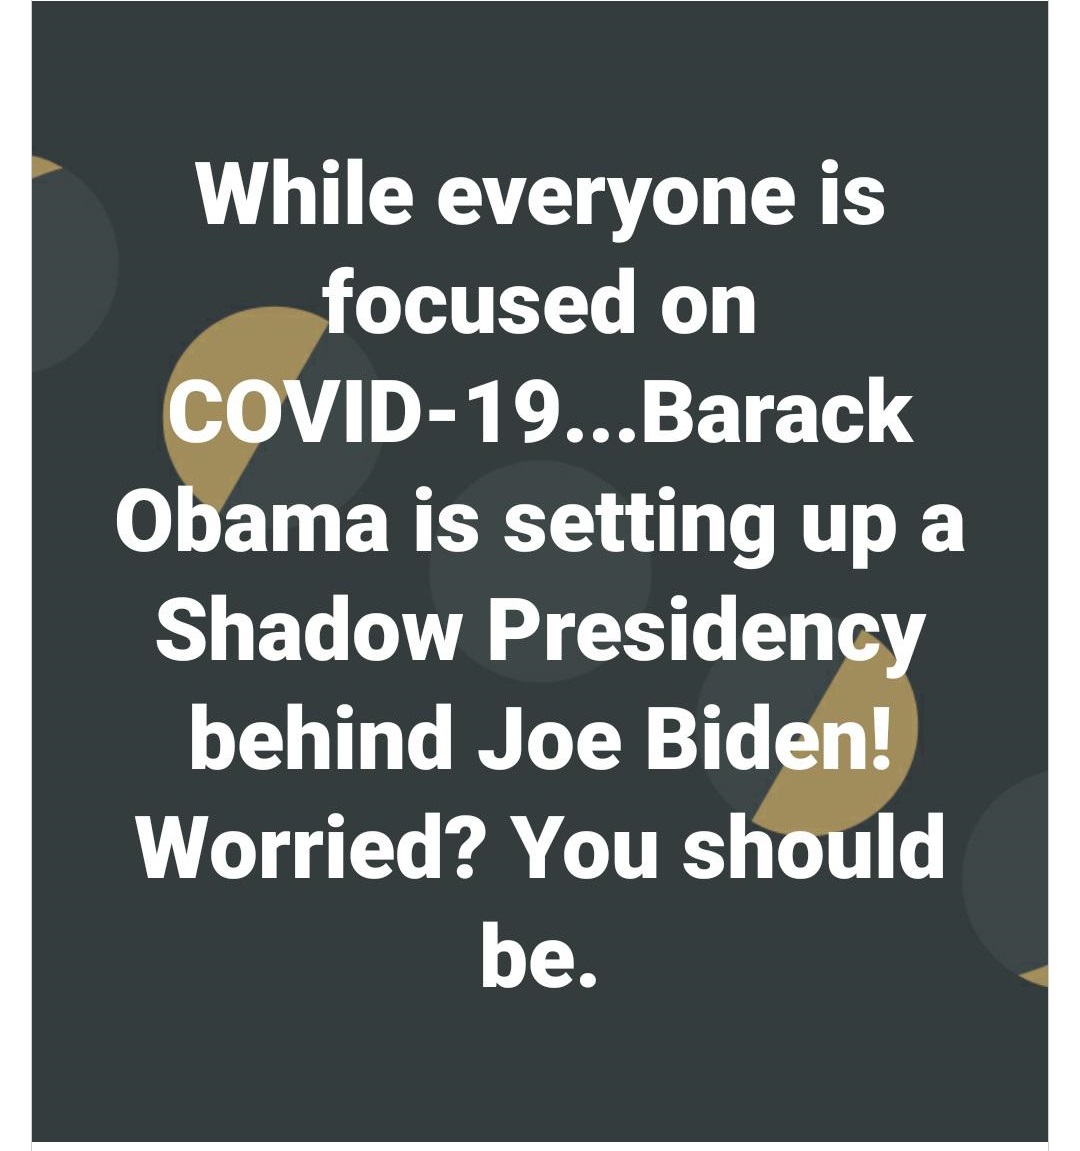 tui brewery (tui hq) - While everyone is focused on Covid19...Barack Obama is setting up a Shadow Presidency behind Joe Biden! Worried? You should be.